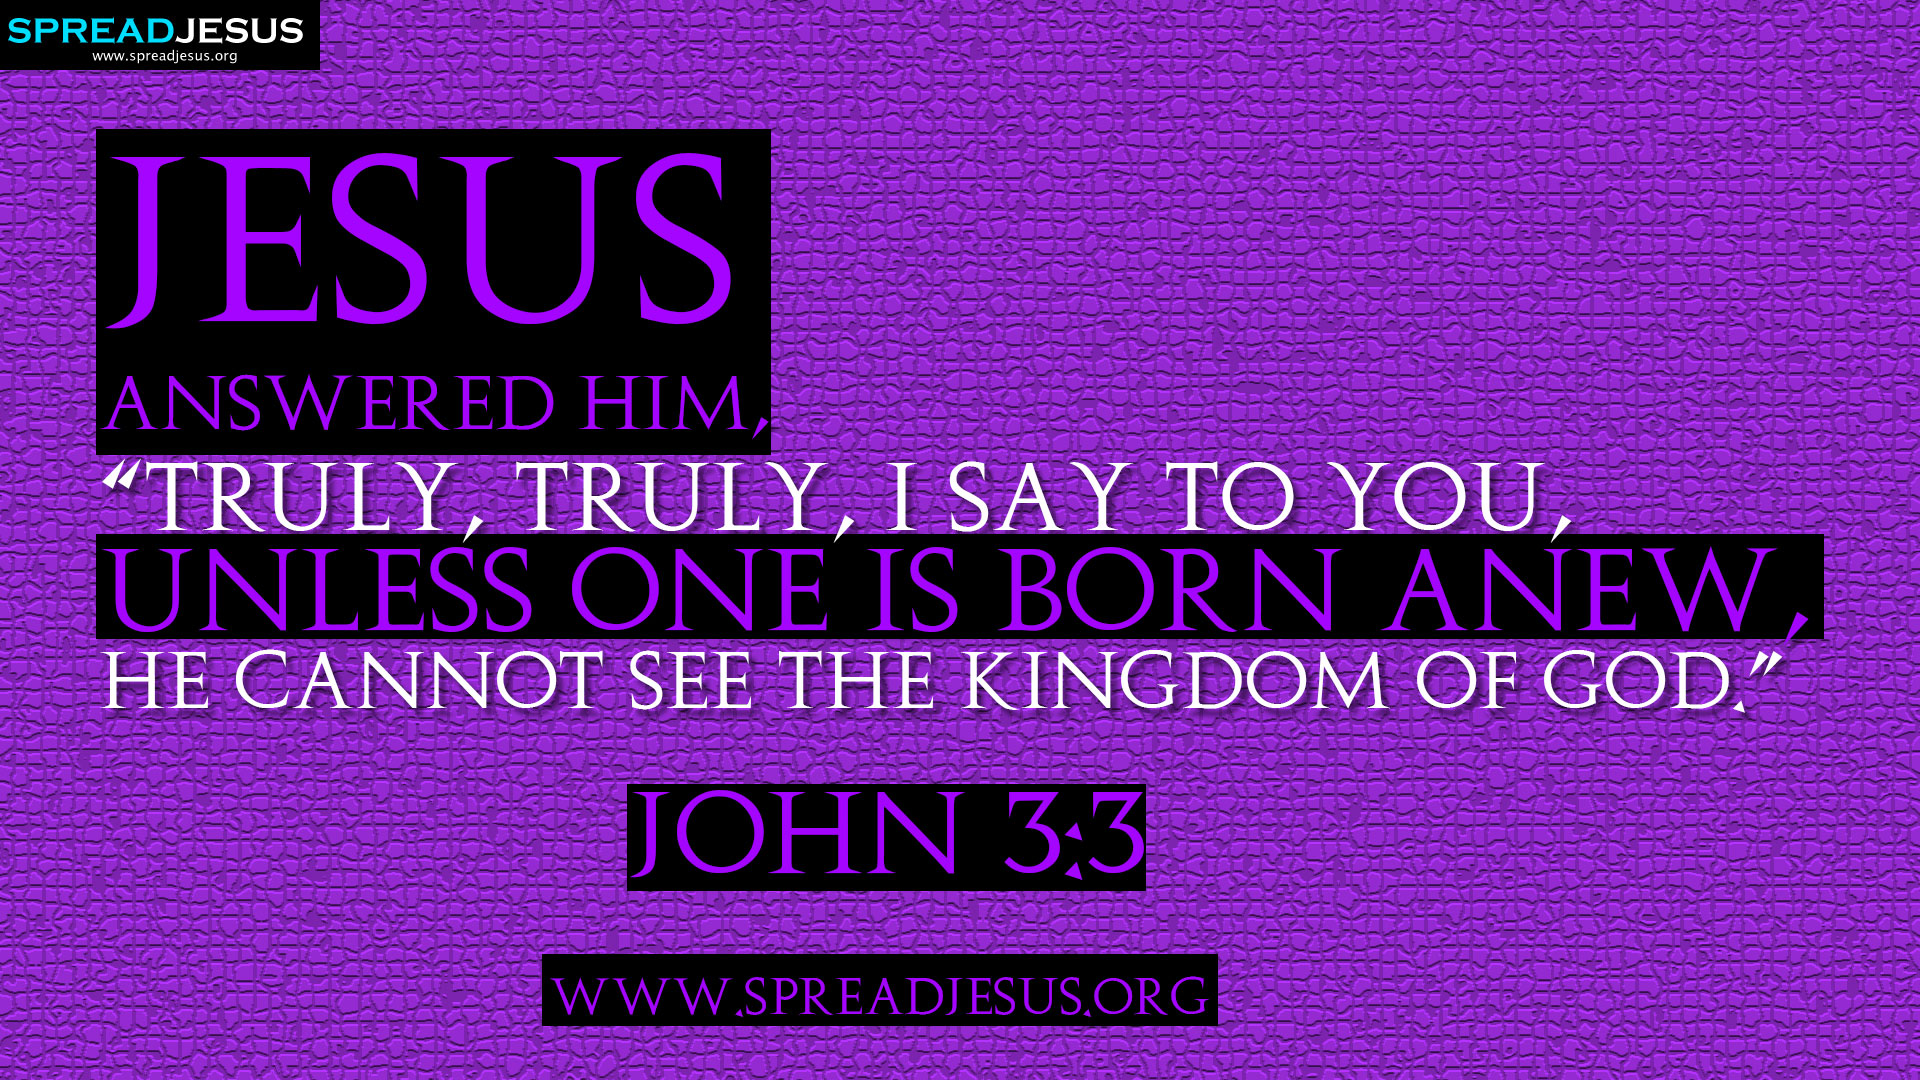 BIBLE QUOTES HD WALLPAPERS JOHN 3:3 FREE DOWNLOAD Jesus answered